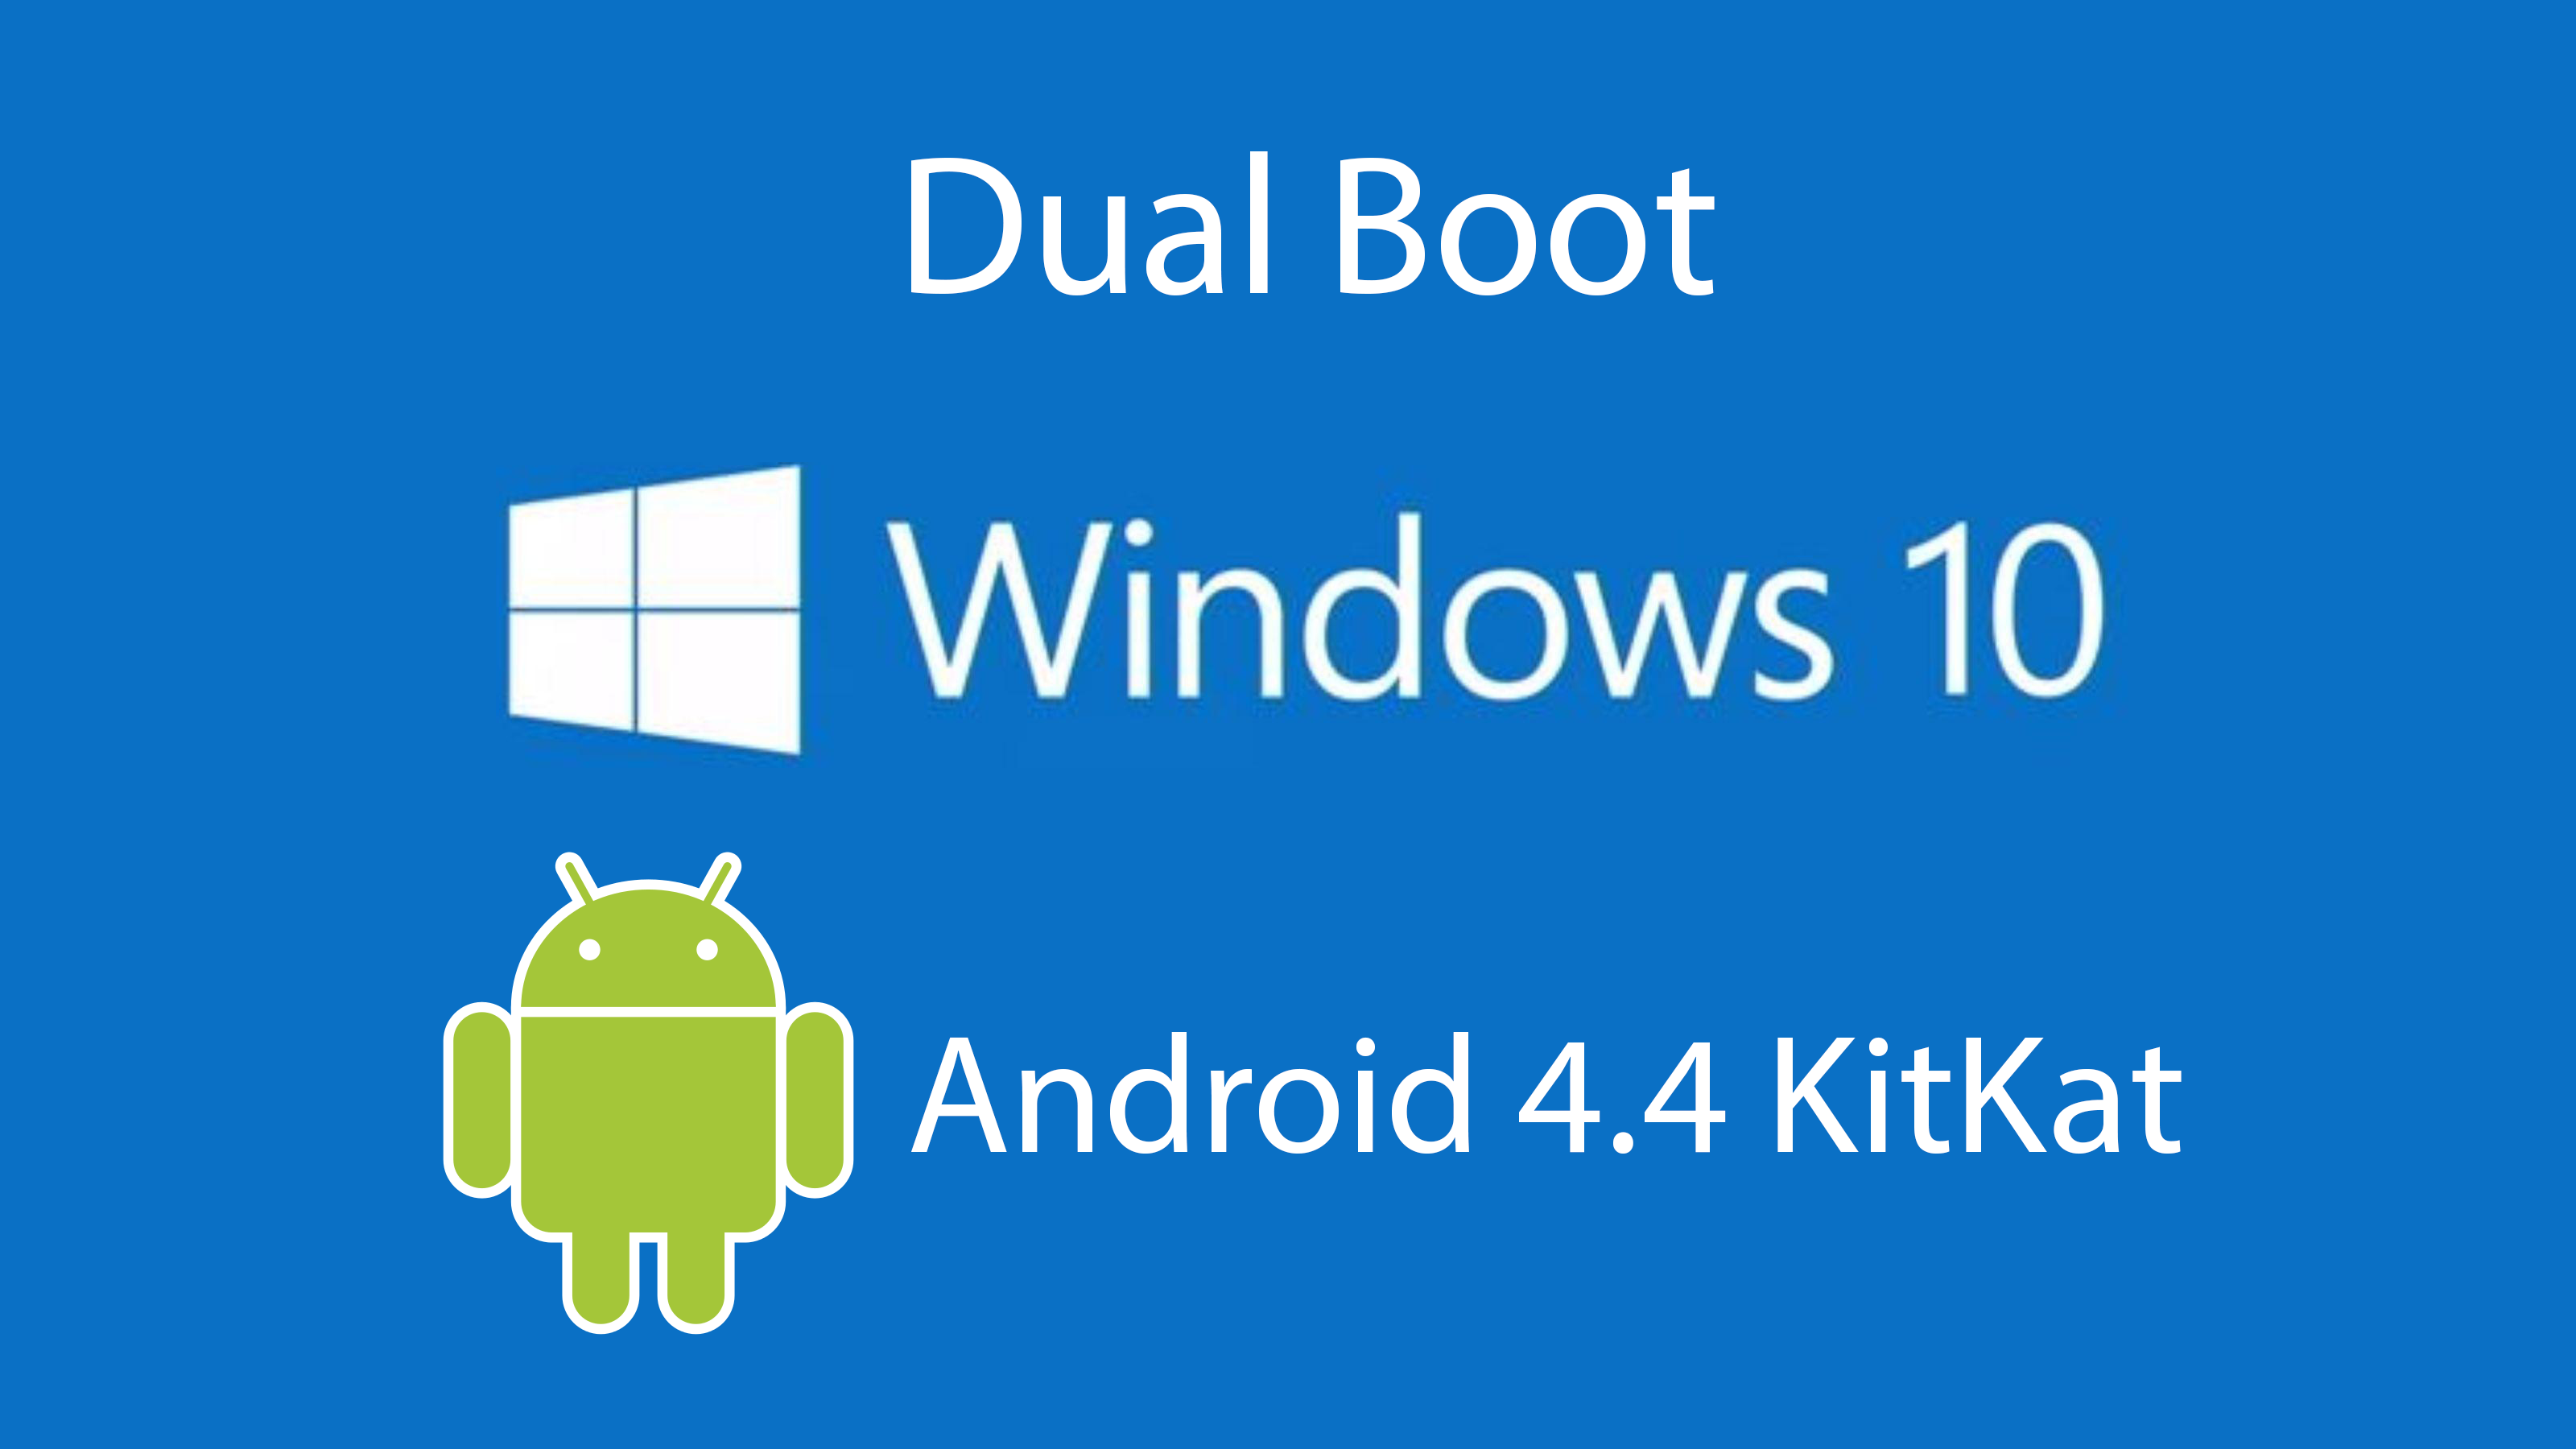 download windows 10 for android 4.4.2